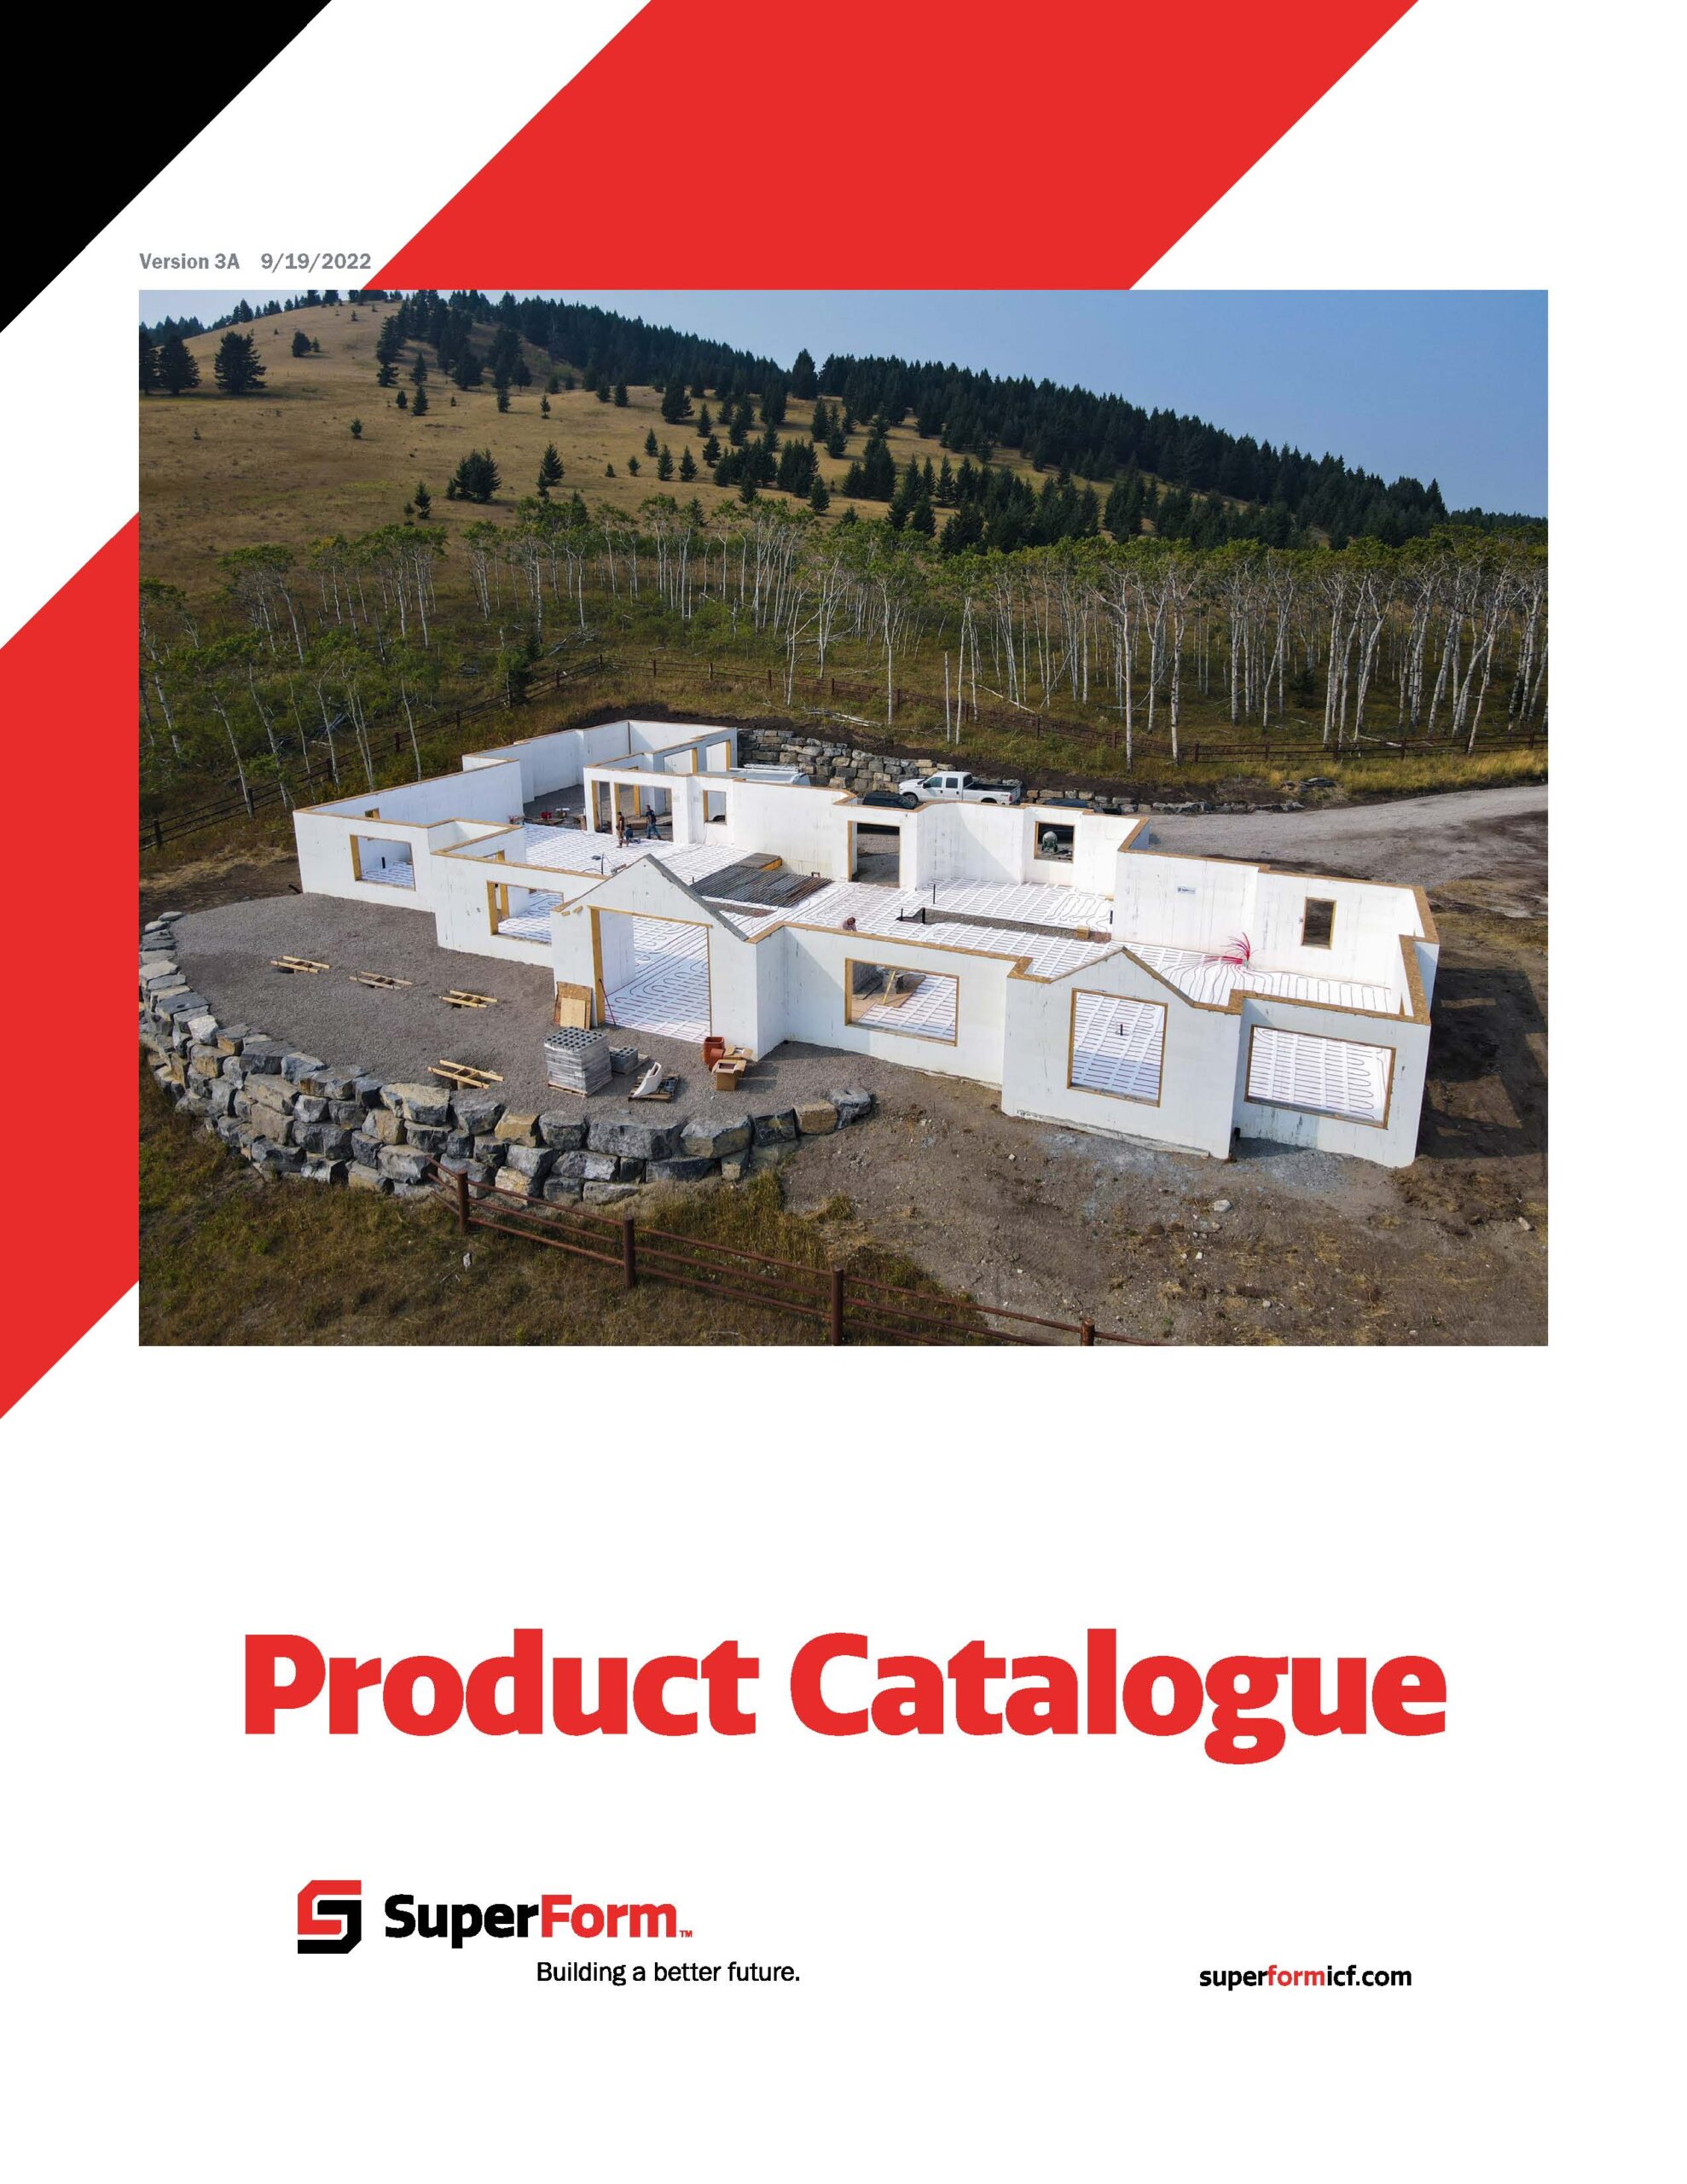 SuperForm_Product Catalogue_091922_FINAL_DIGITAL 1_FrontCover_2